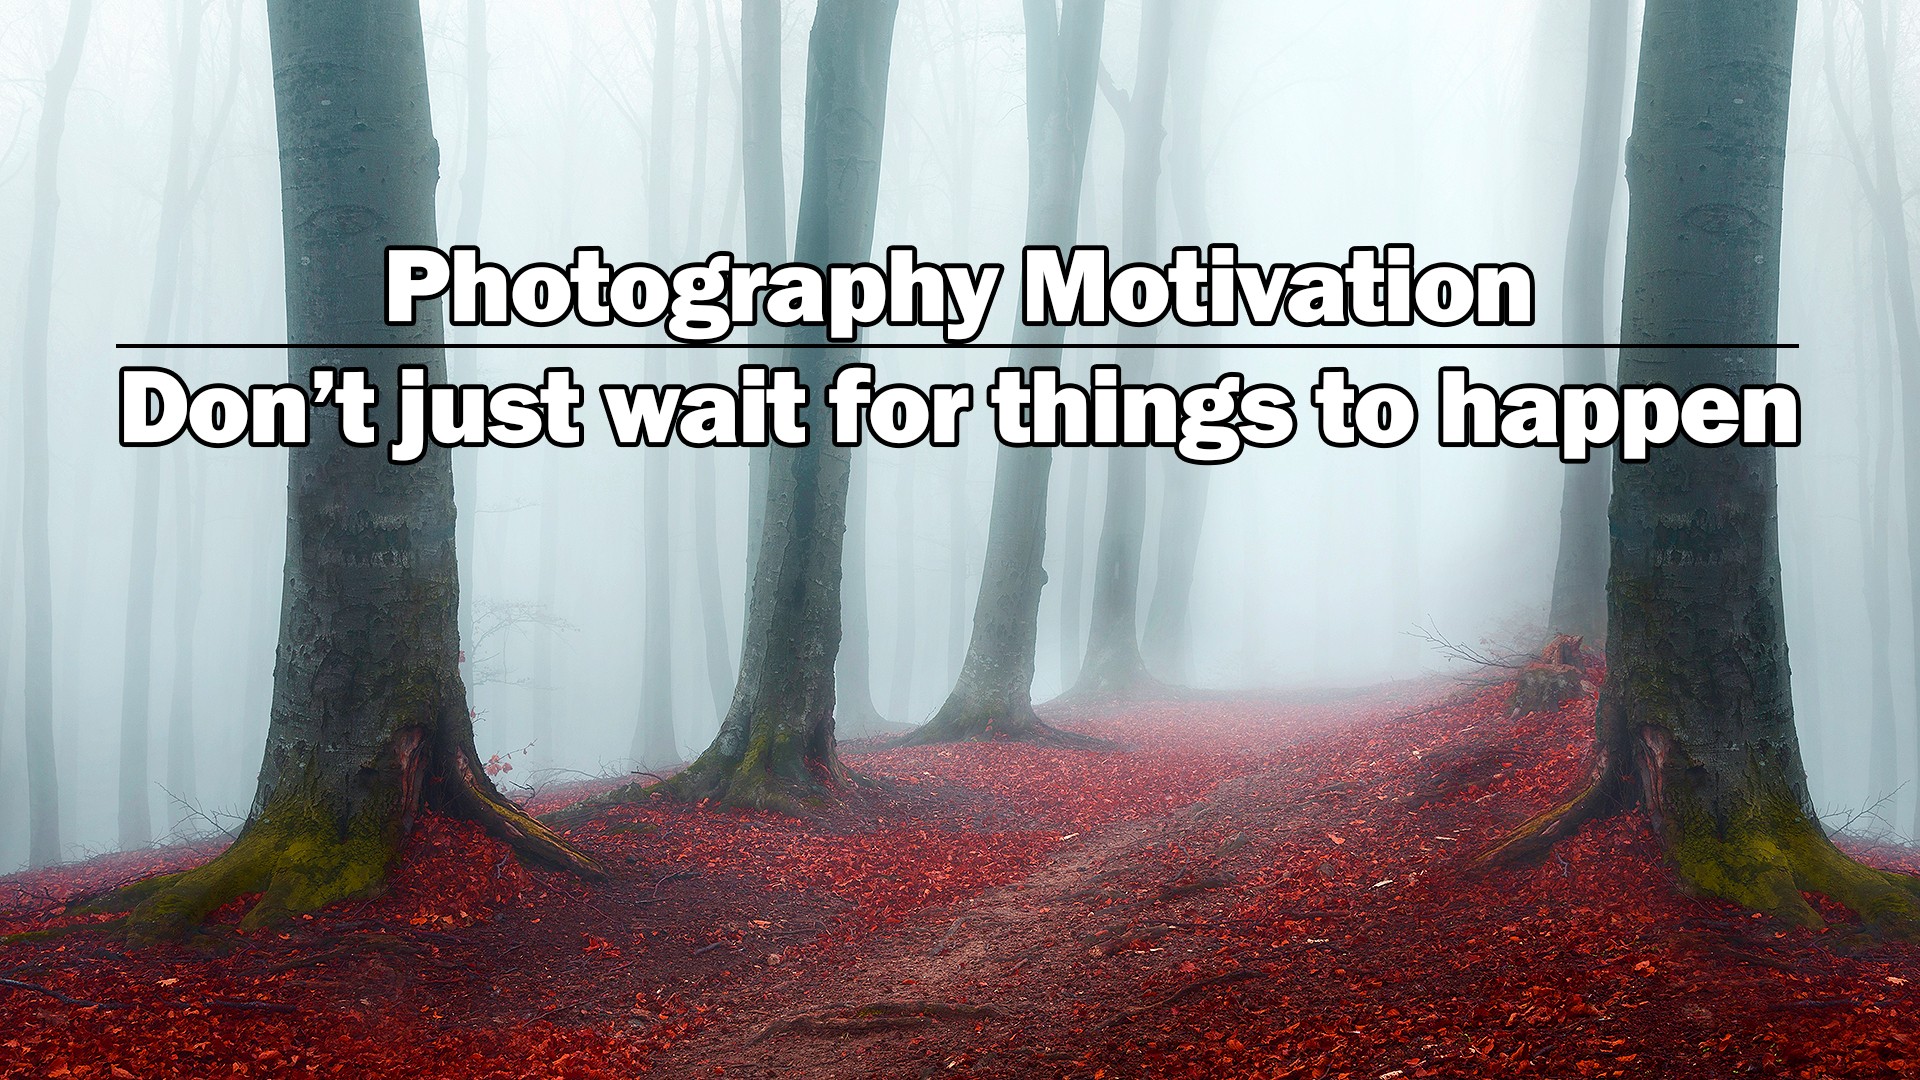 Photography Motivation: Don’t just wait for things to happen